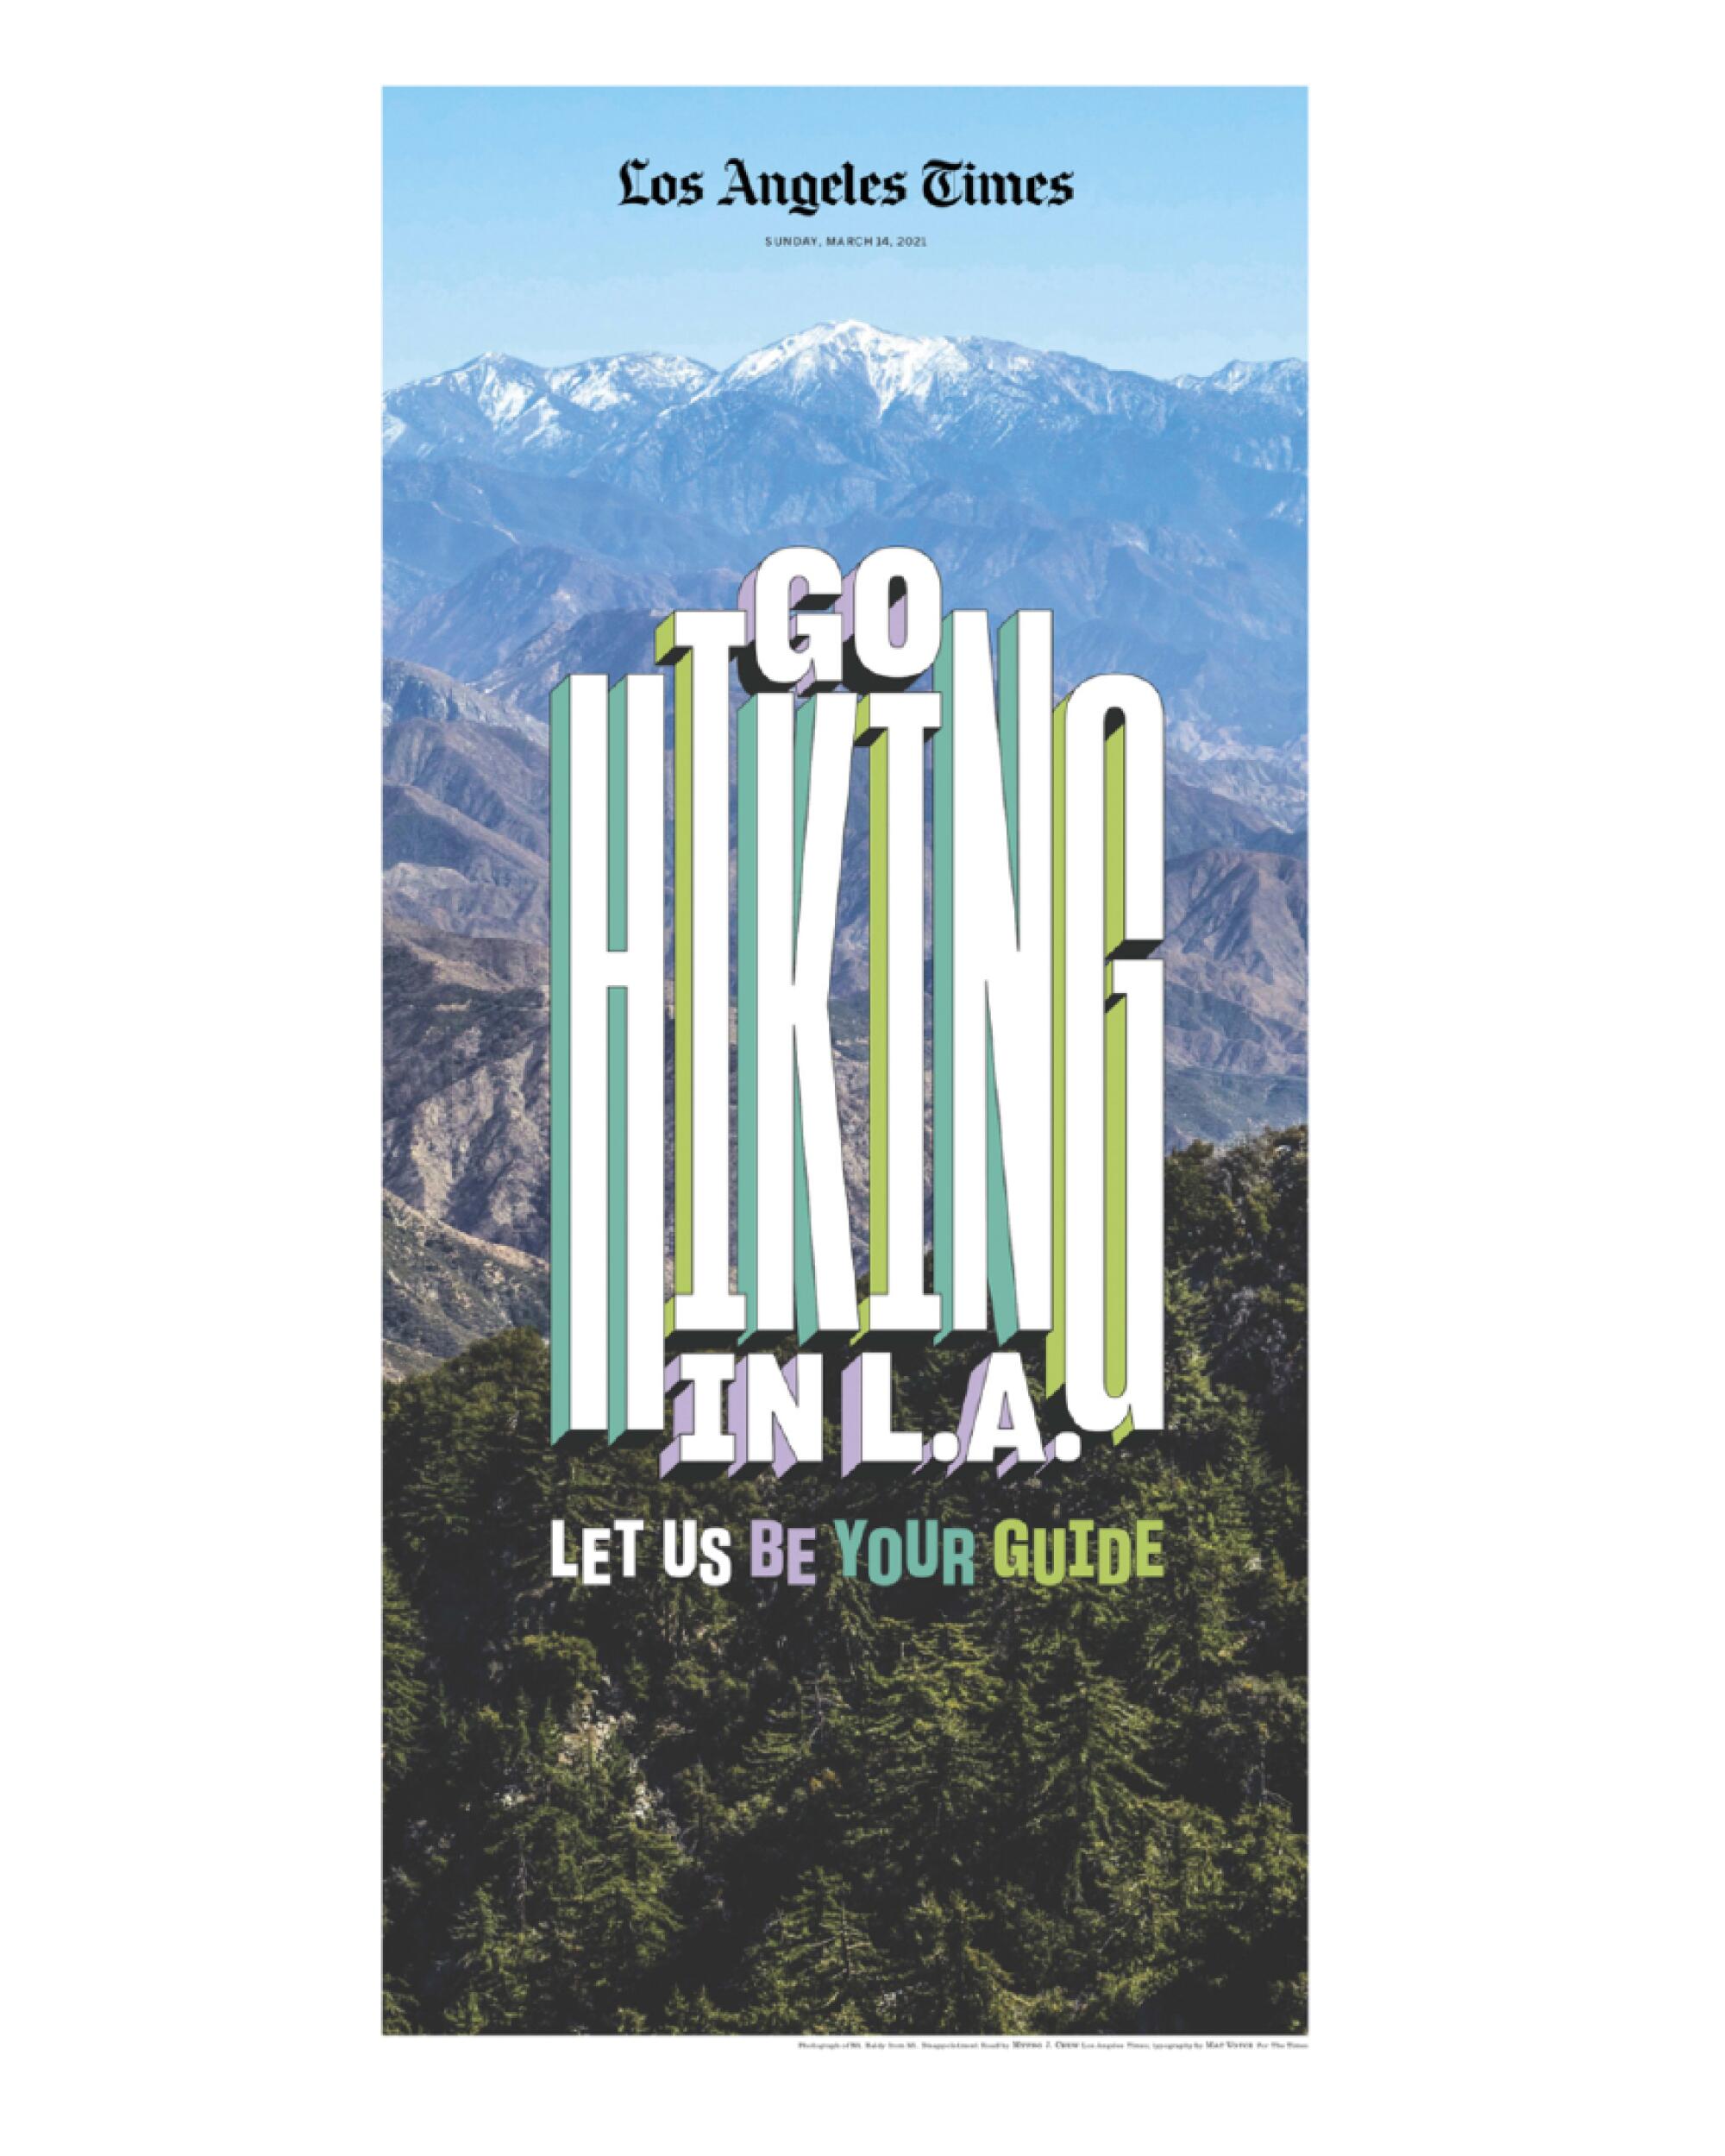 A print edition of the Los Angeles Times hiking guide